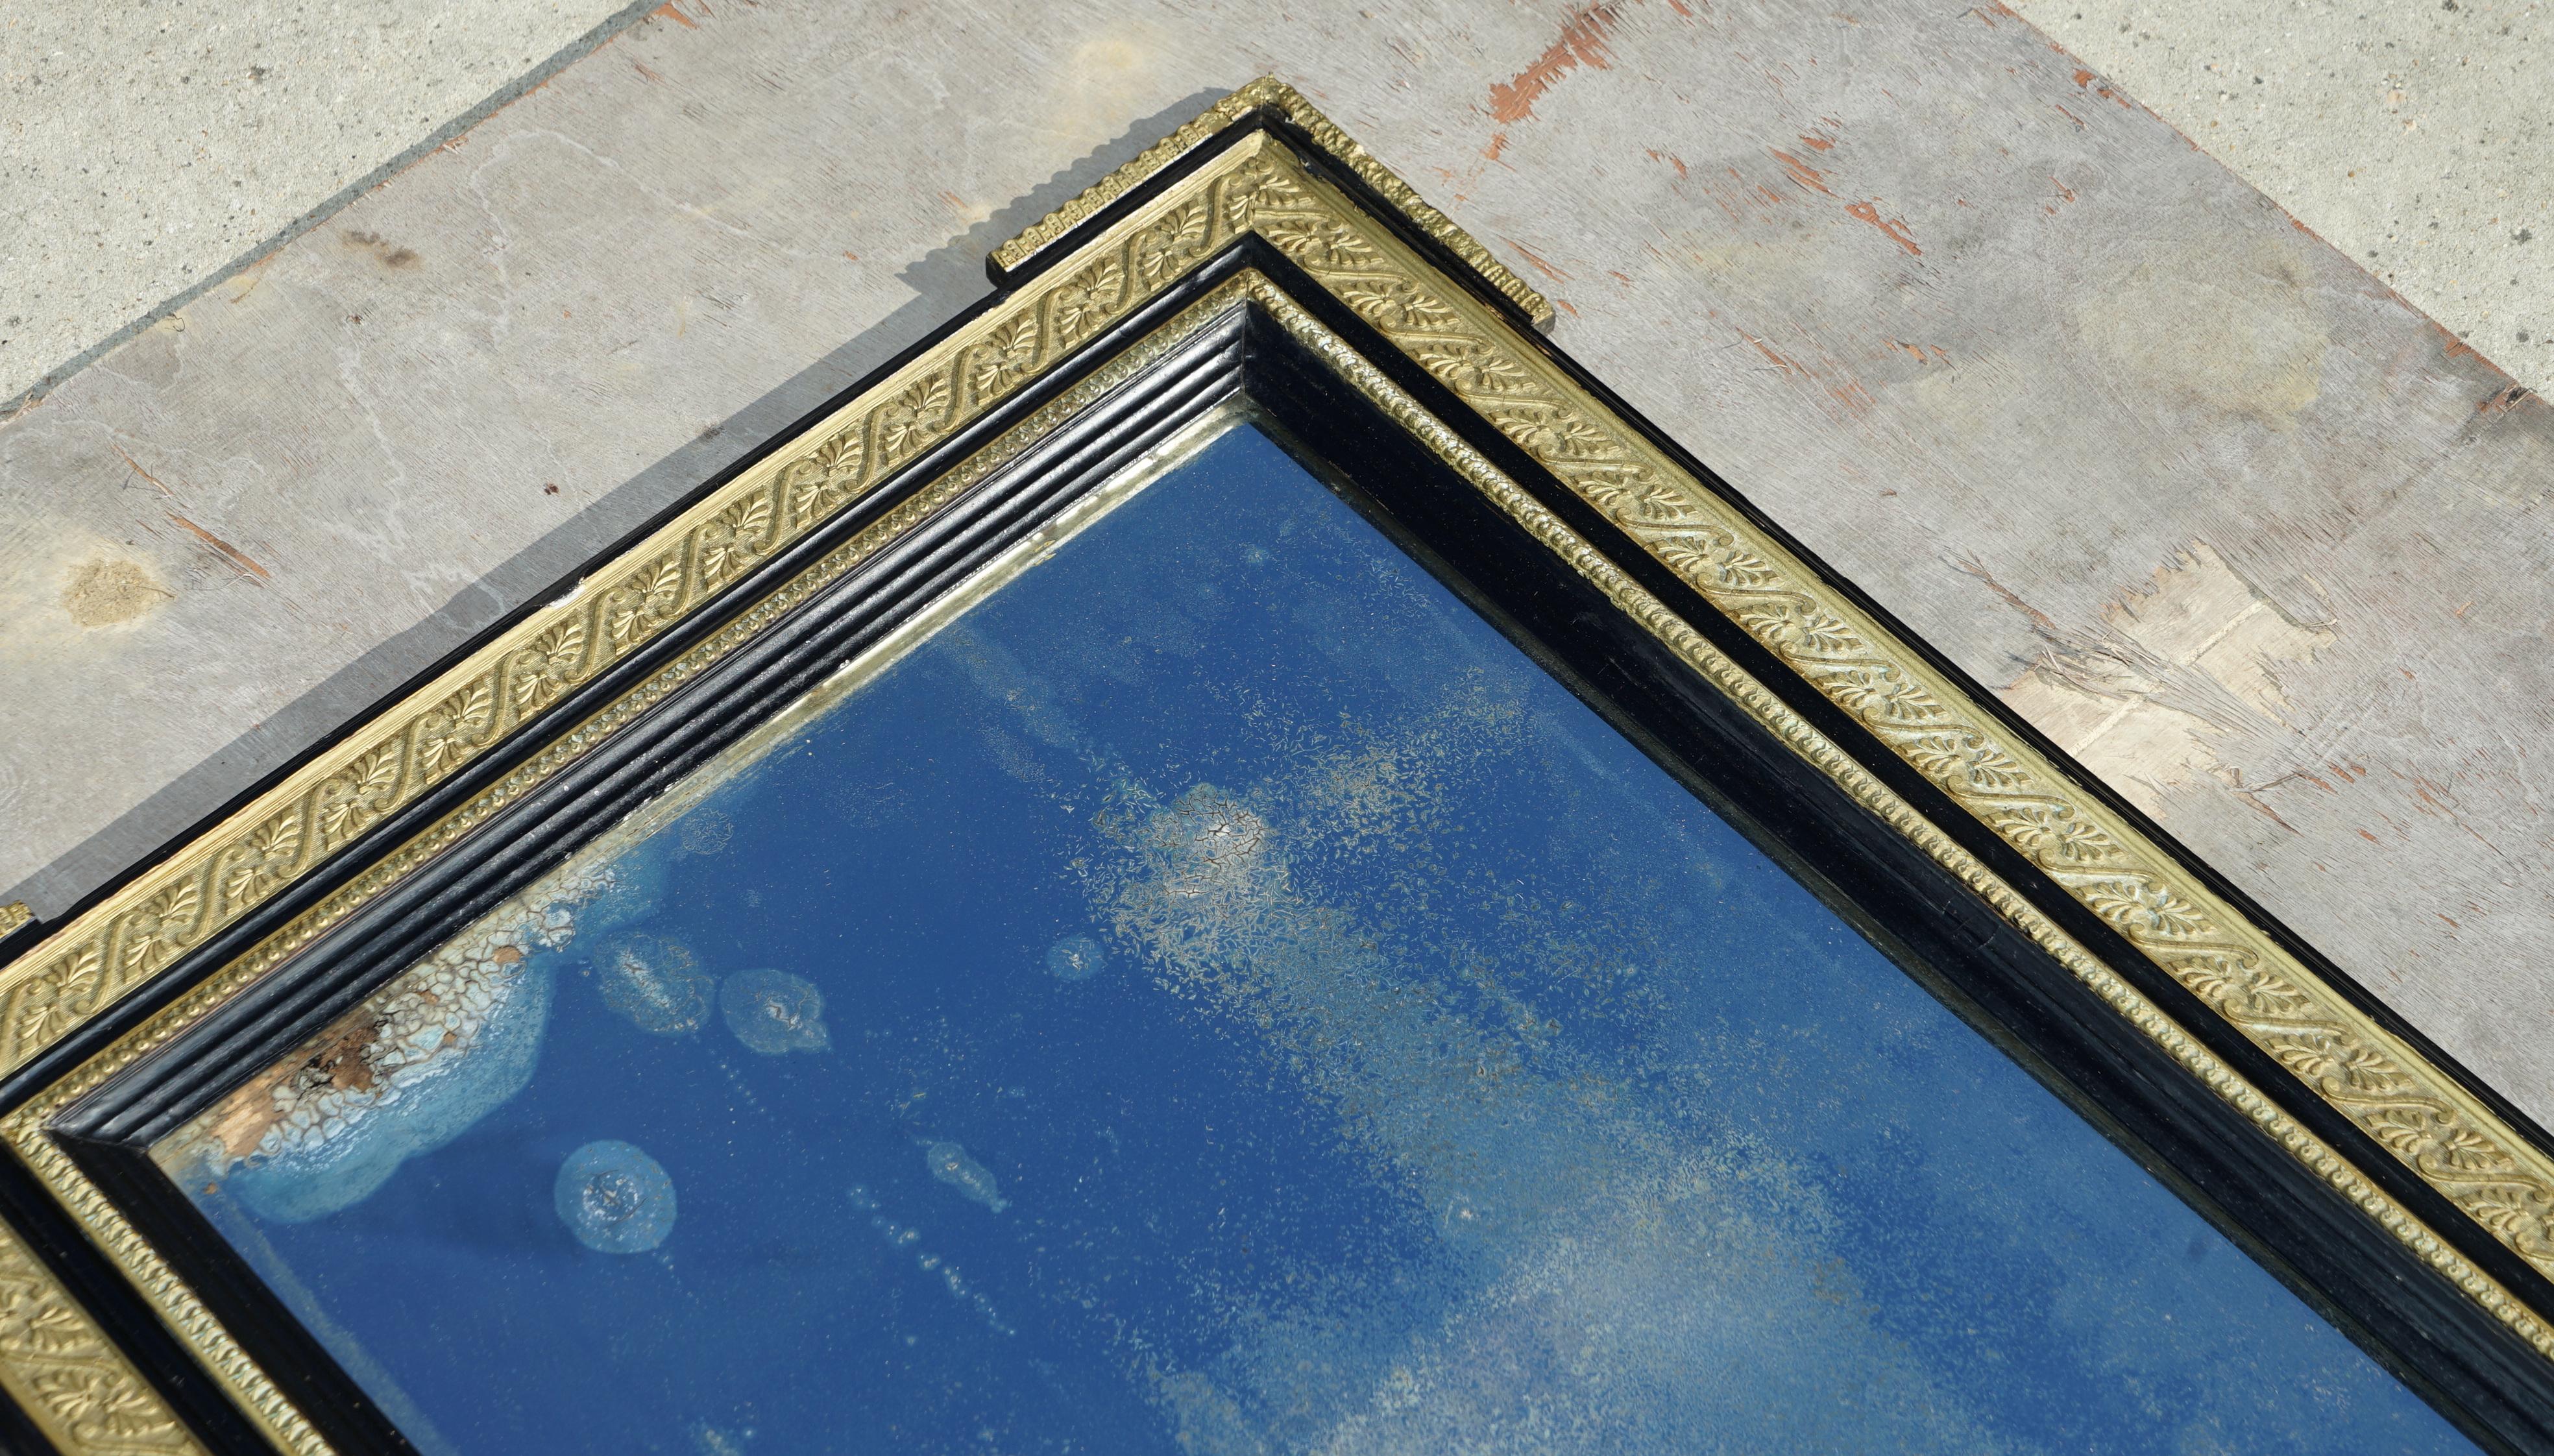 Hand-Crafted ANTIQUE CIRCA 1840 ITALIAN FOXED GLASS ORIGINAL PLATE MiRROR STUNNING GILT FRAME For Sale